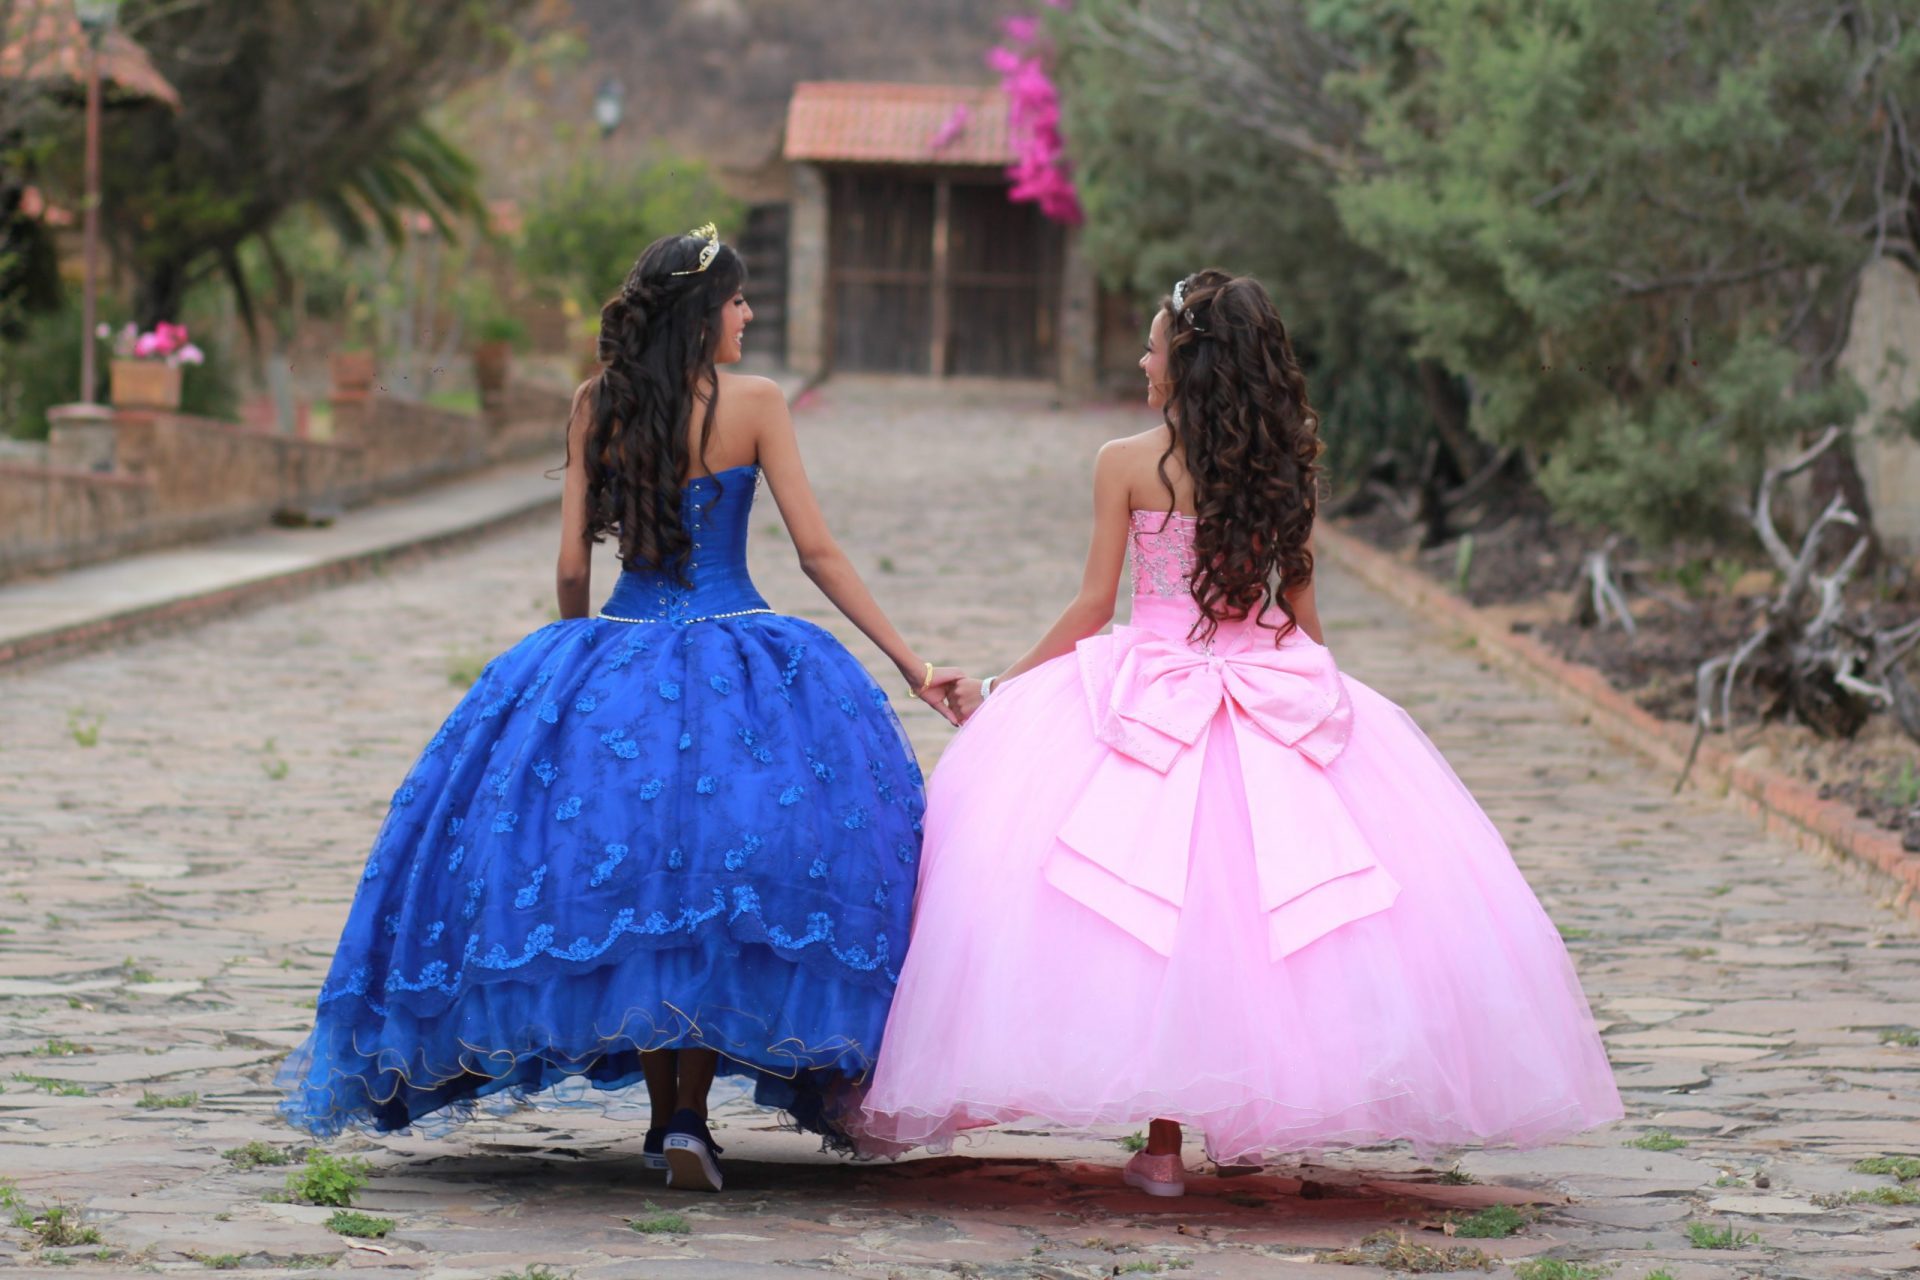 10 Reasons to Hire a Party Bus for Your Quinceanera